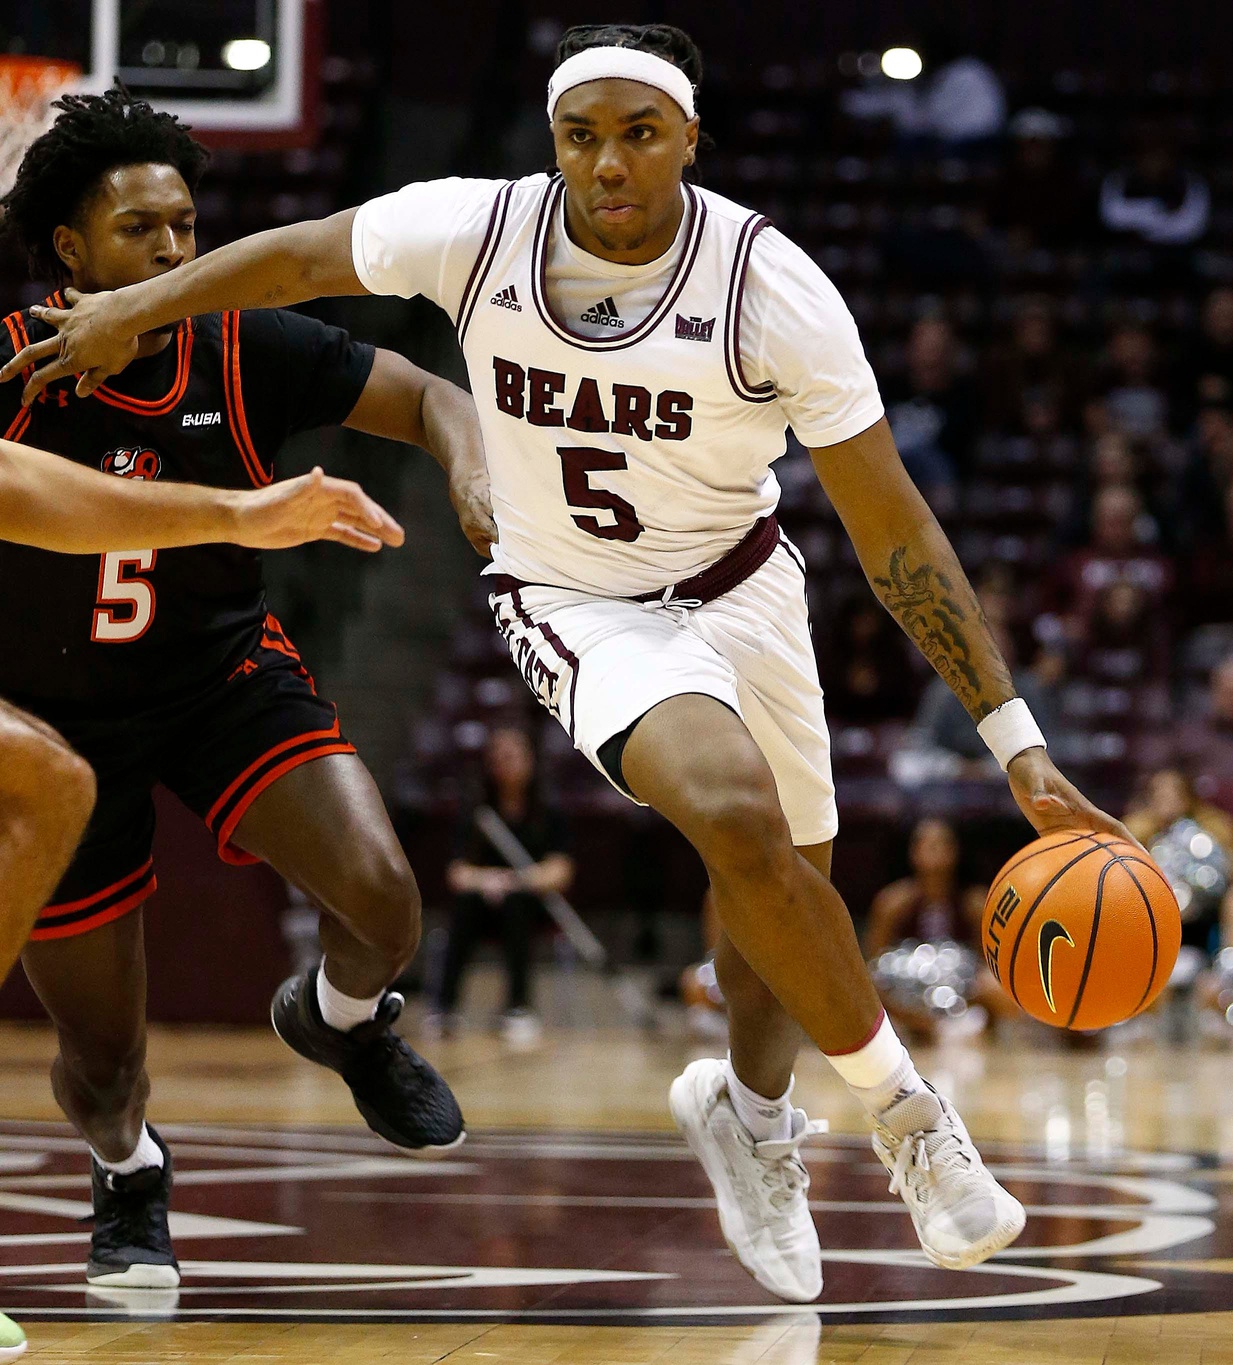 college basketball picks Donovan Clay Missouri State Bears predictions best bet odds